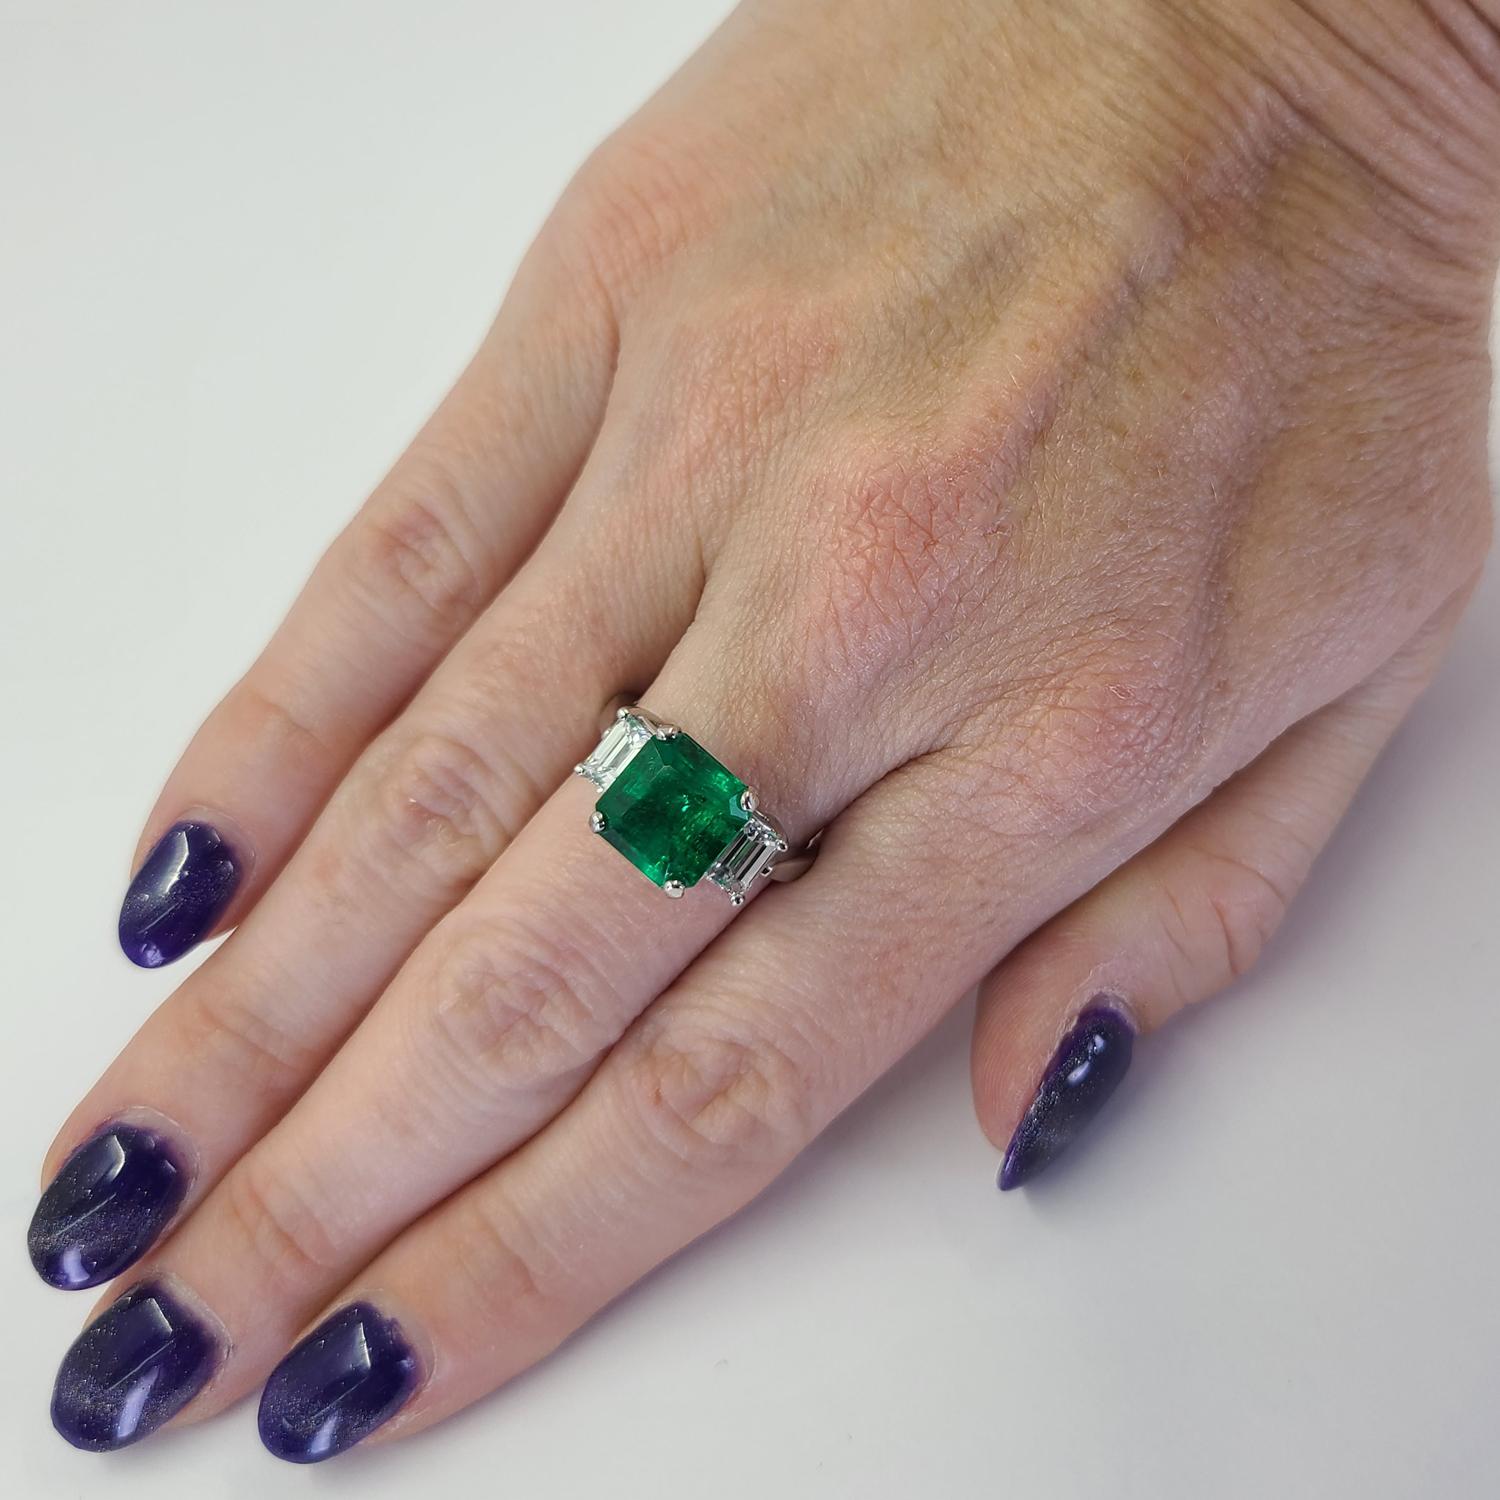 Stunning Platinum 3 Stone Ring Featuring A 3.38 Carat Emerald Cut Colombian Emerald (GIA Report #5222713474) Accented By 2 Emerald Cut Diamonds of VS Clarity and G Color Totaling Approximately 1.00 Carat. Finger Size 6.5; Purchase Includes One